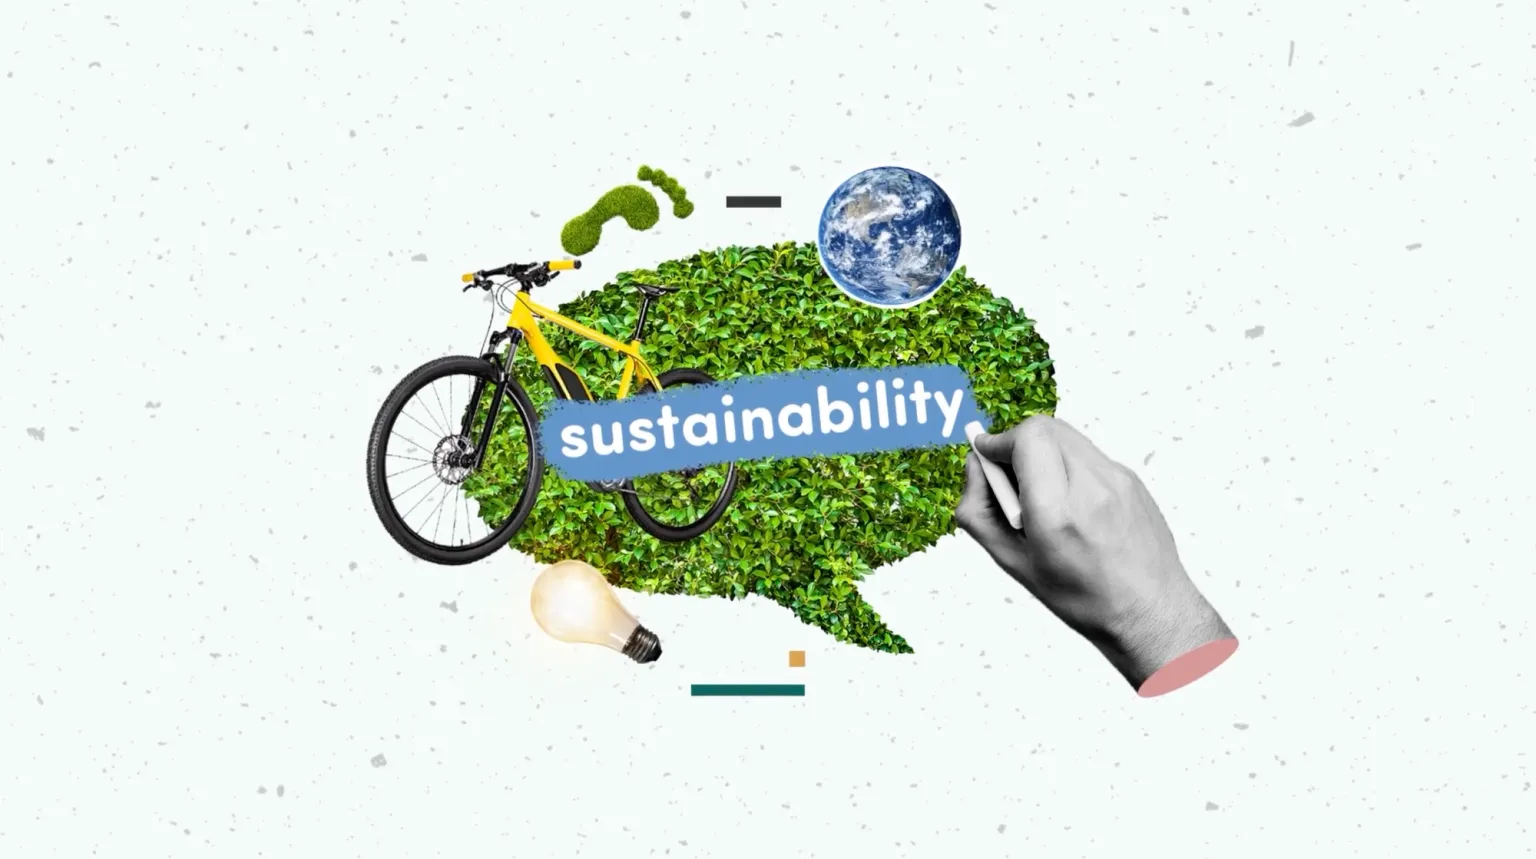 So your company has been making great strides to improve its environmental and social performance. But how do you go about letting the world know about it?